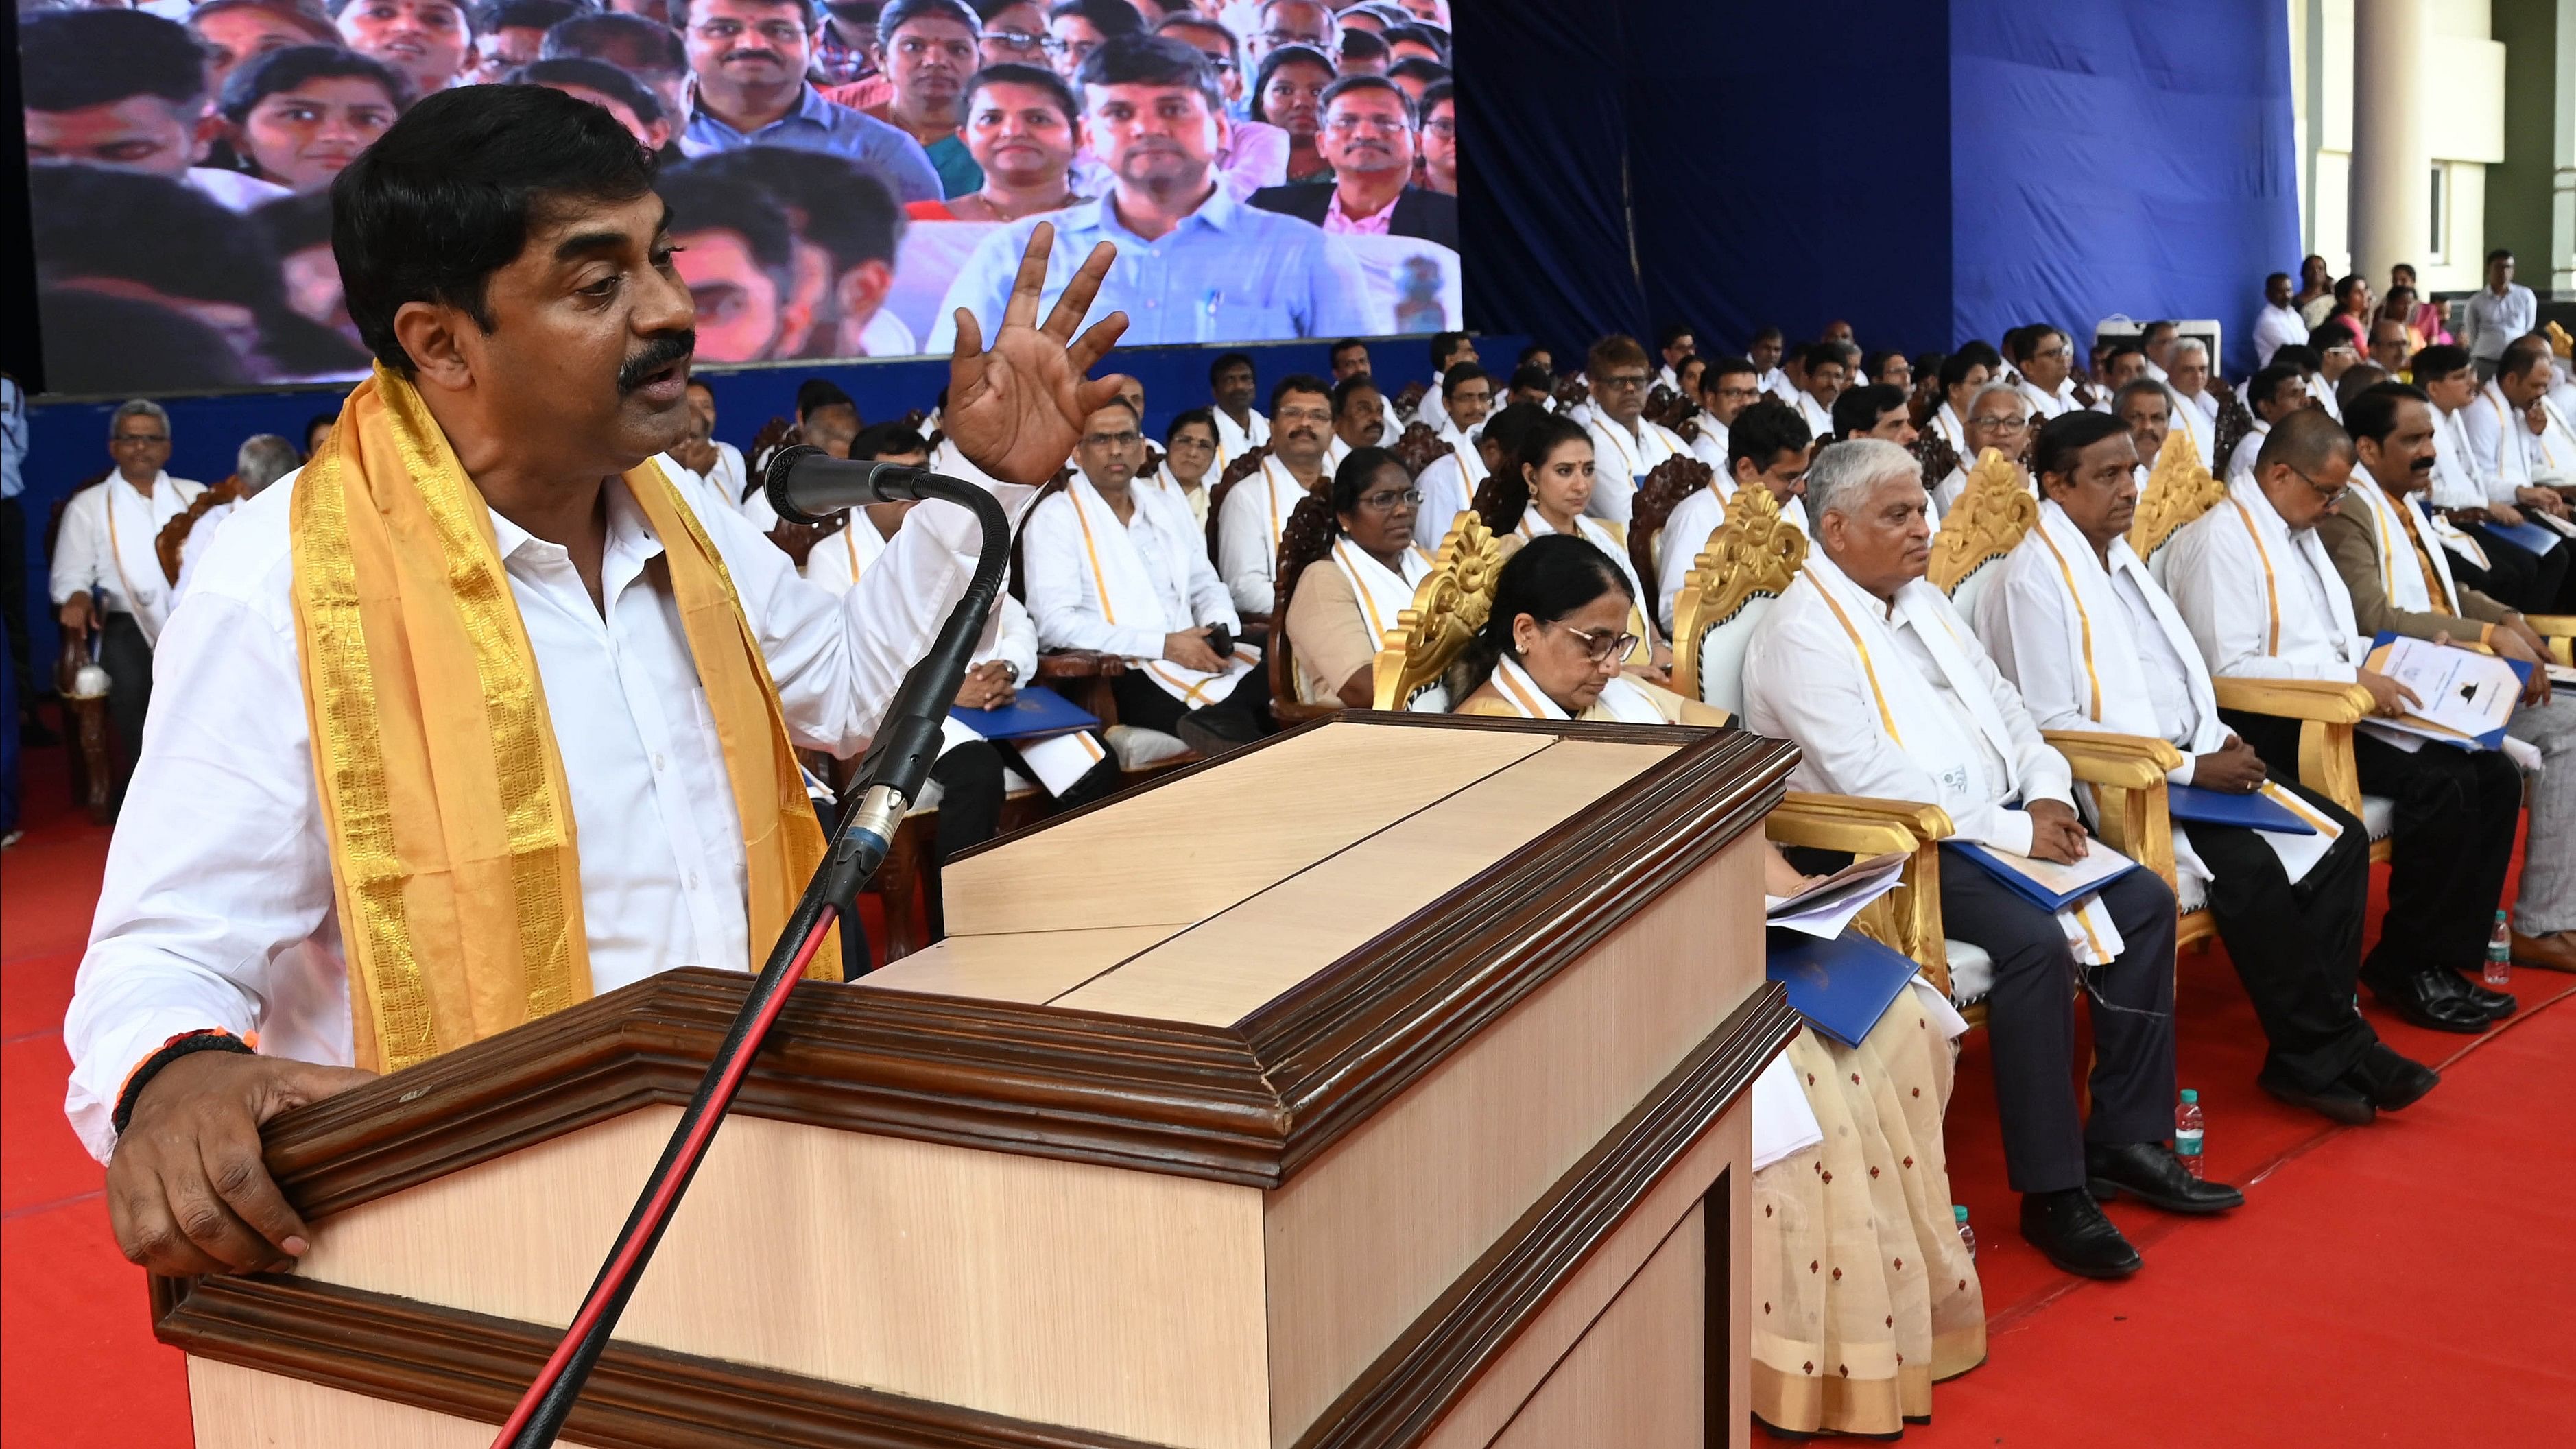 <div class="paragraphs"><p>Dr G Satheesh Reddy, the former Chairman of India's Defence Research and Development Organisation (DRDO) and Scientific Advisor to the Defence Minister delivering the 21st convocation address at NITK, Surathkal.</p></div><div class="paragraphs"><p><br></p></div>